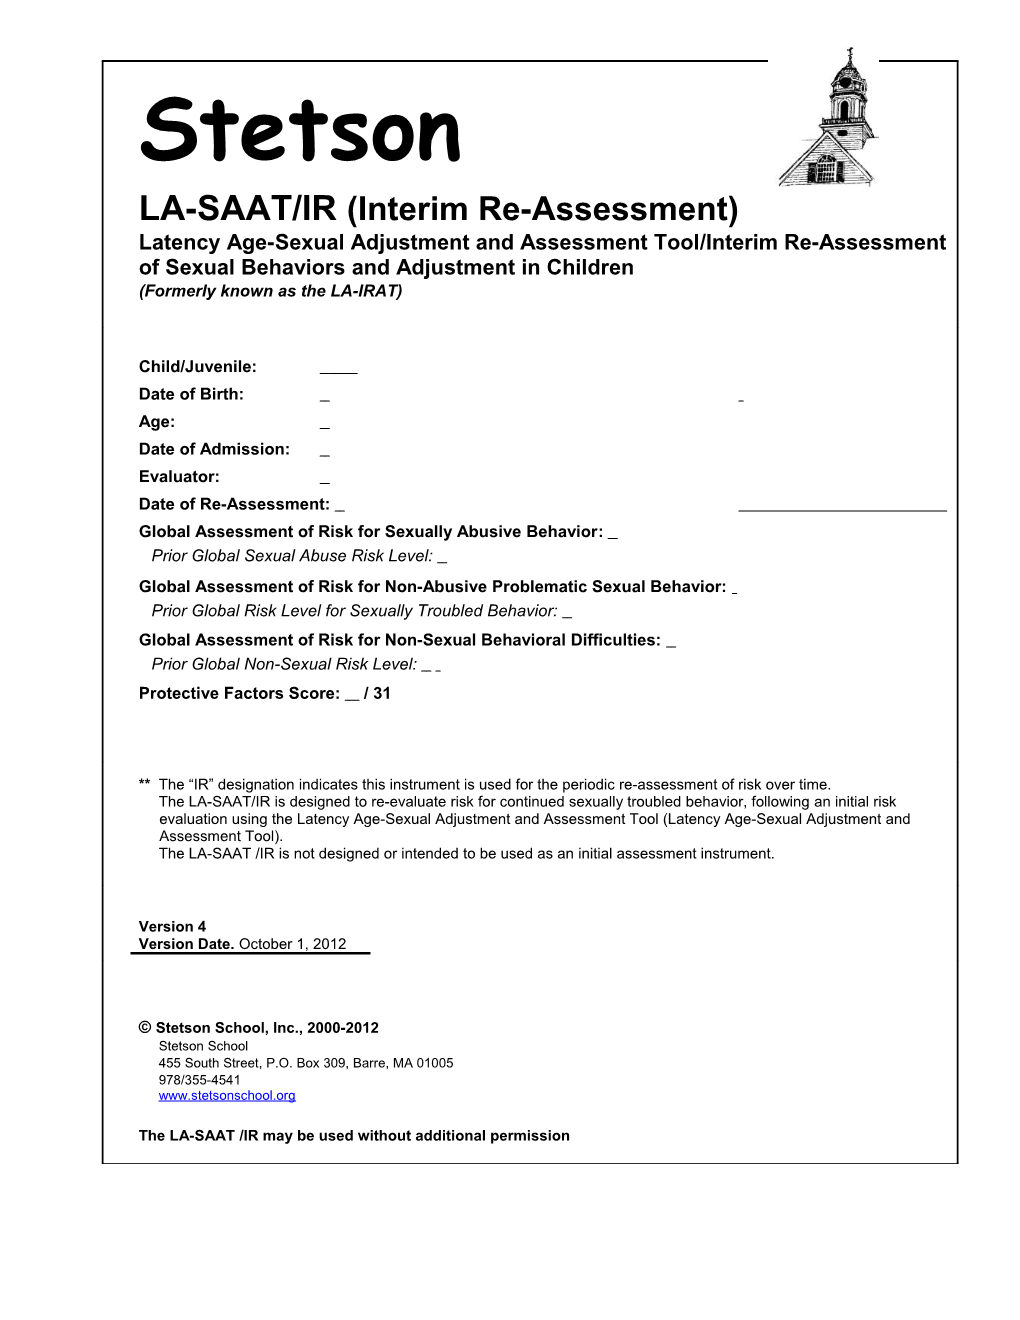 Latency Age-Sexual Adjustment and Assessment Tool/IR